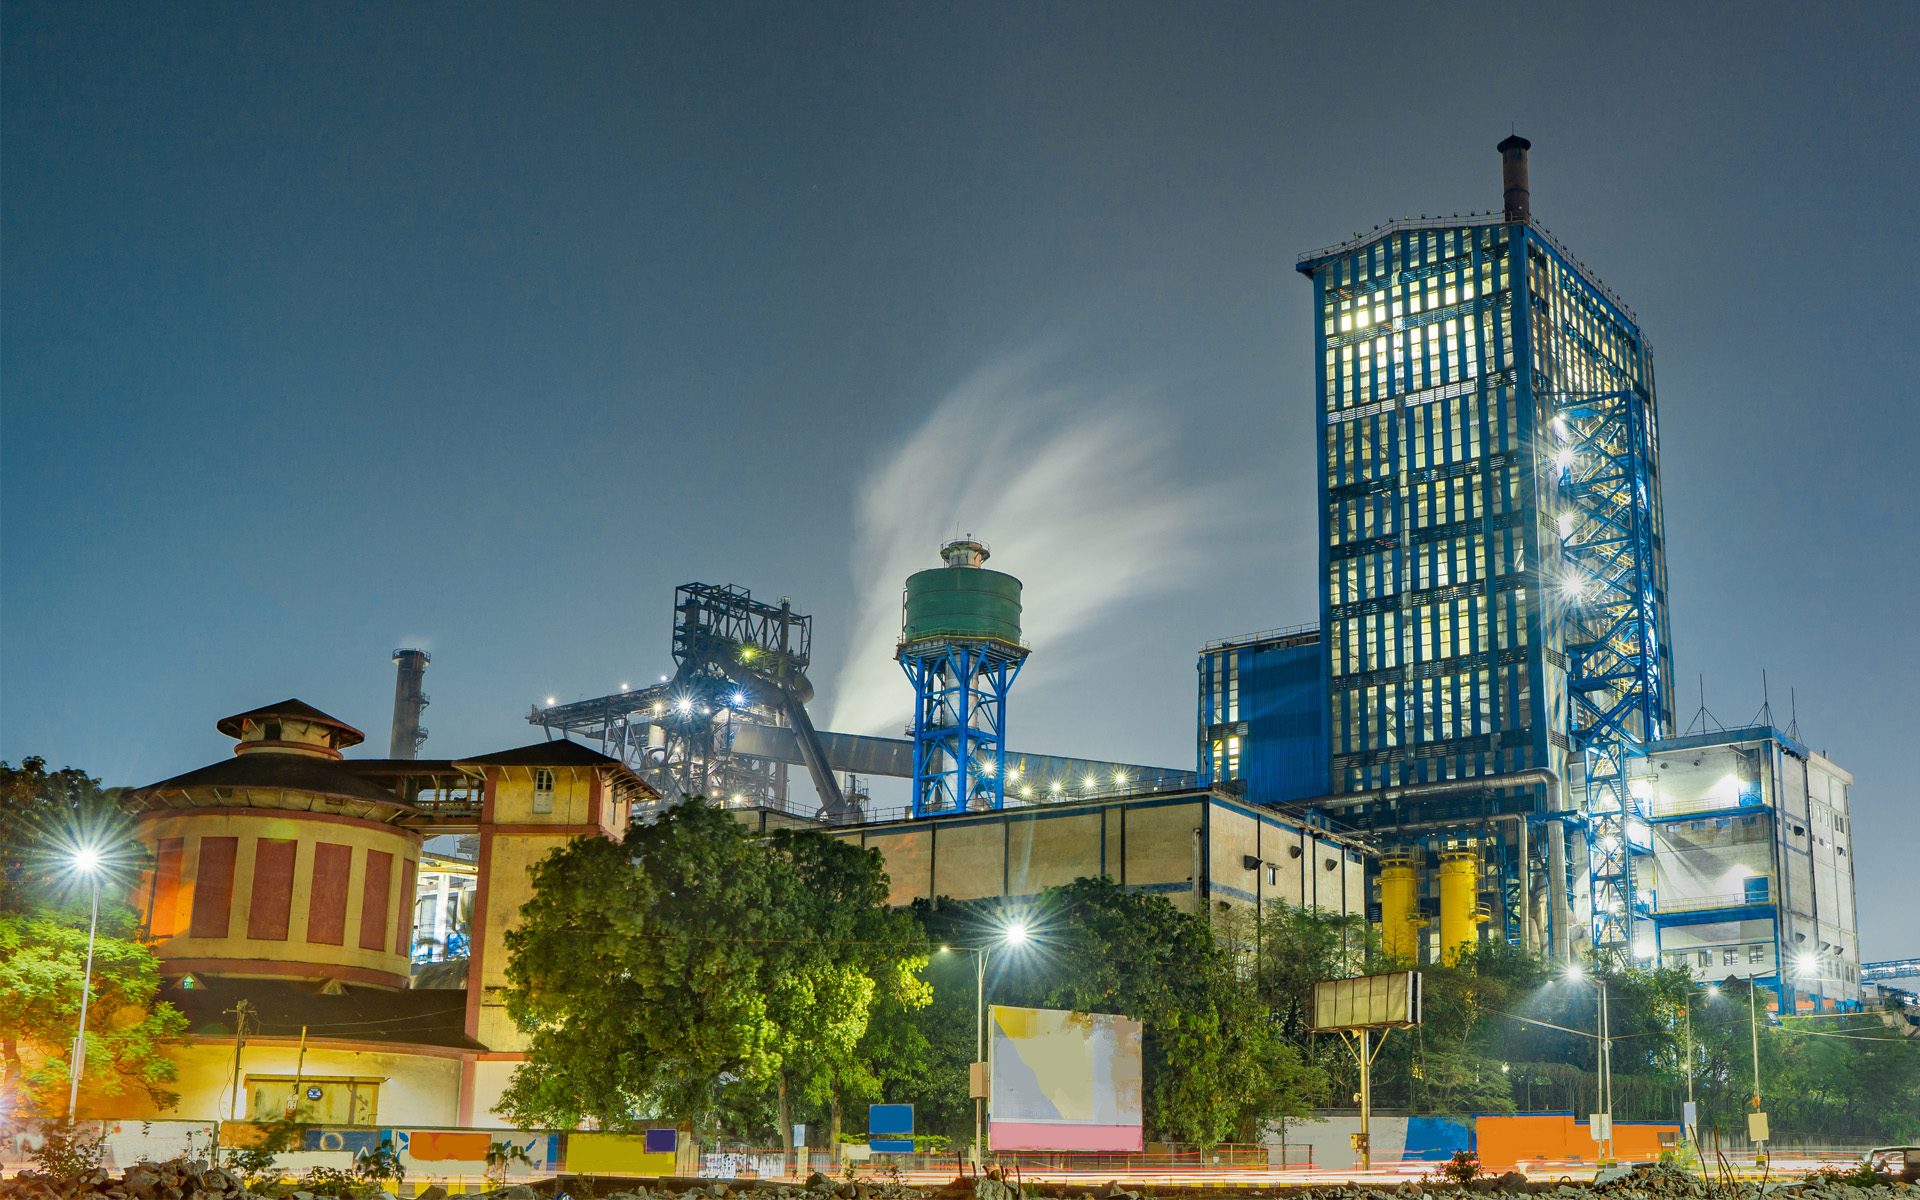 Large Steel plant with the chimney at night from Jamshedpur, Jharkhand, India, Tata Steel plant; Shutterstock ID 2000010494